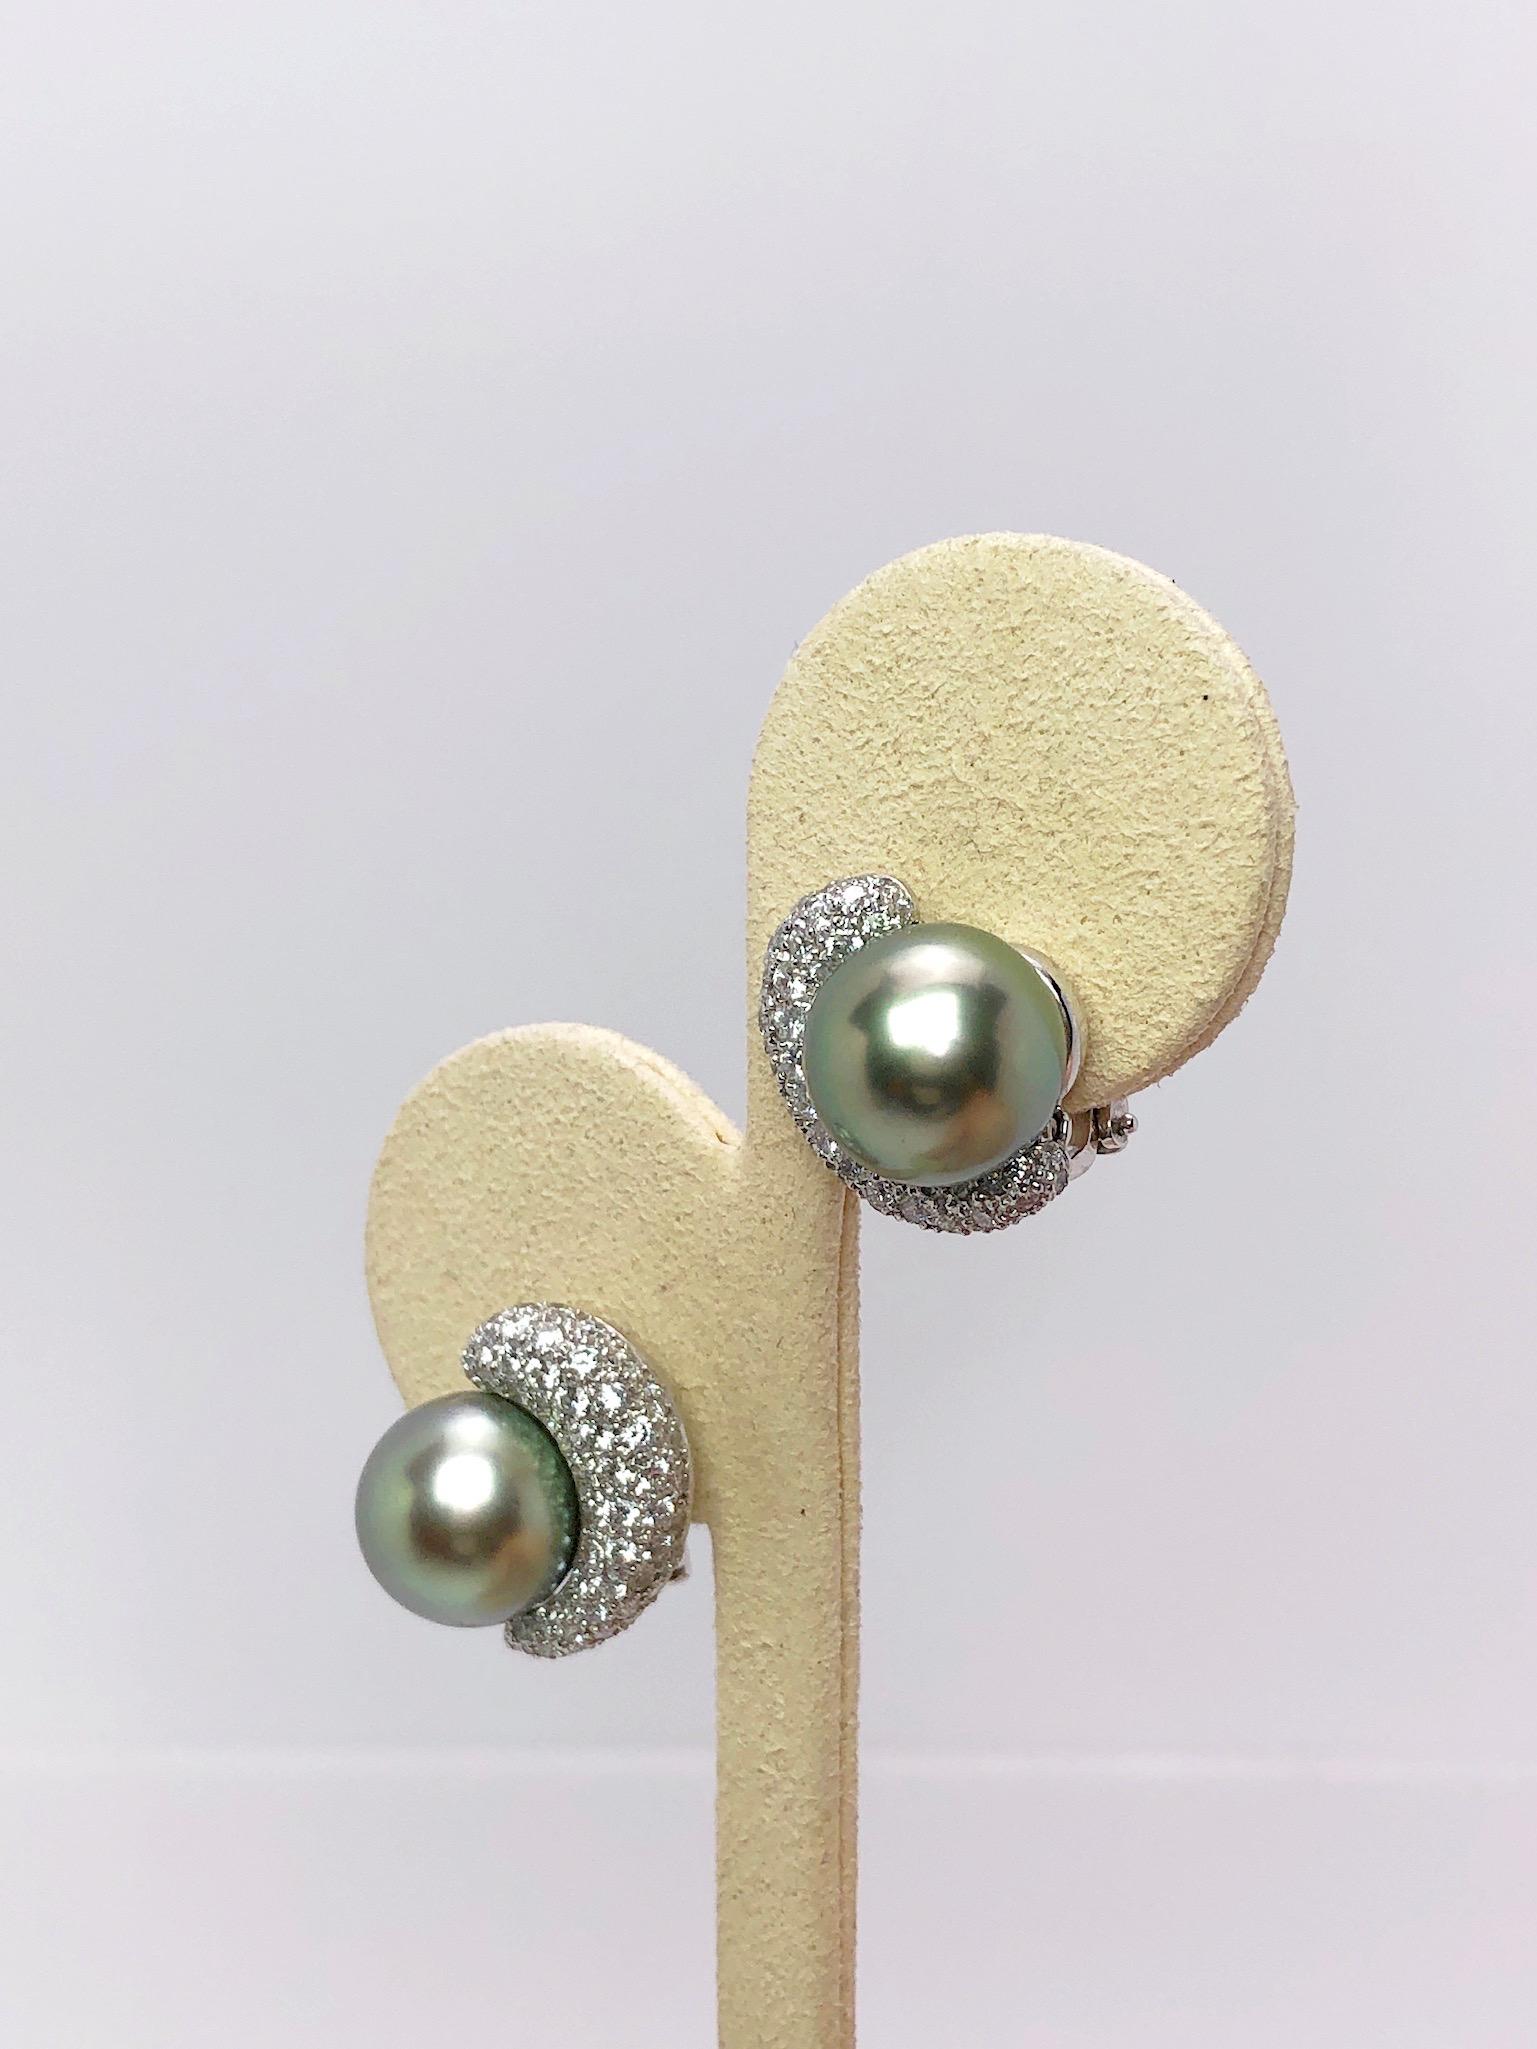 Crescent shaped earrings designed with pave Diamonds and  beautiful Green Tahitian Pearls.These earrings have an adjustable post suitable for pierced and non pierced ears. Approximately 5/8